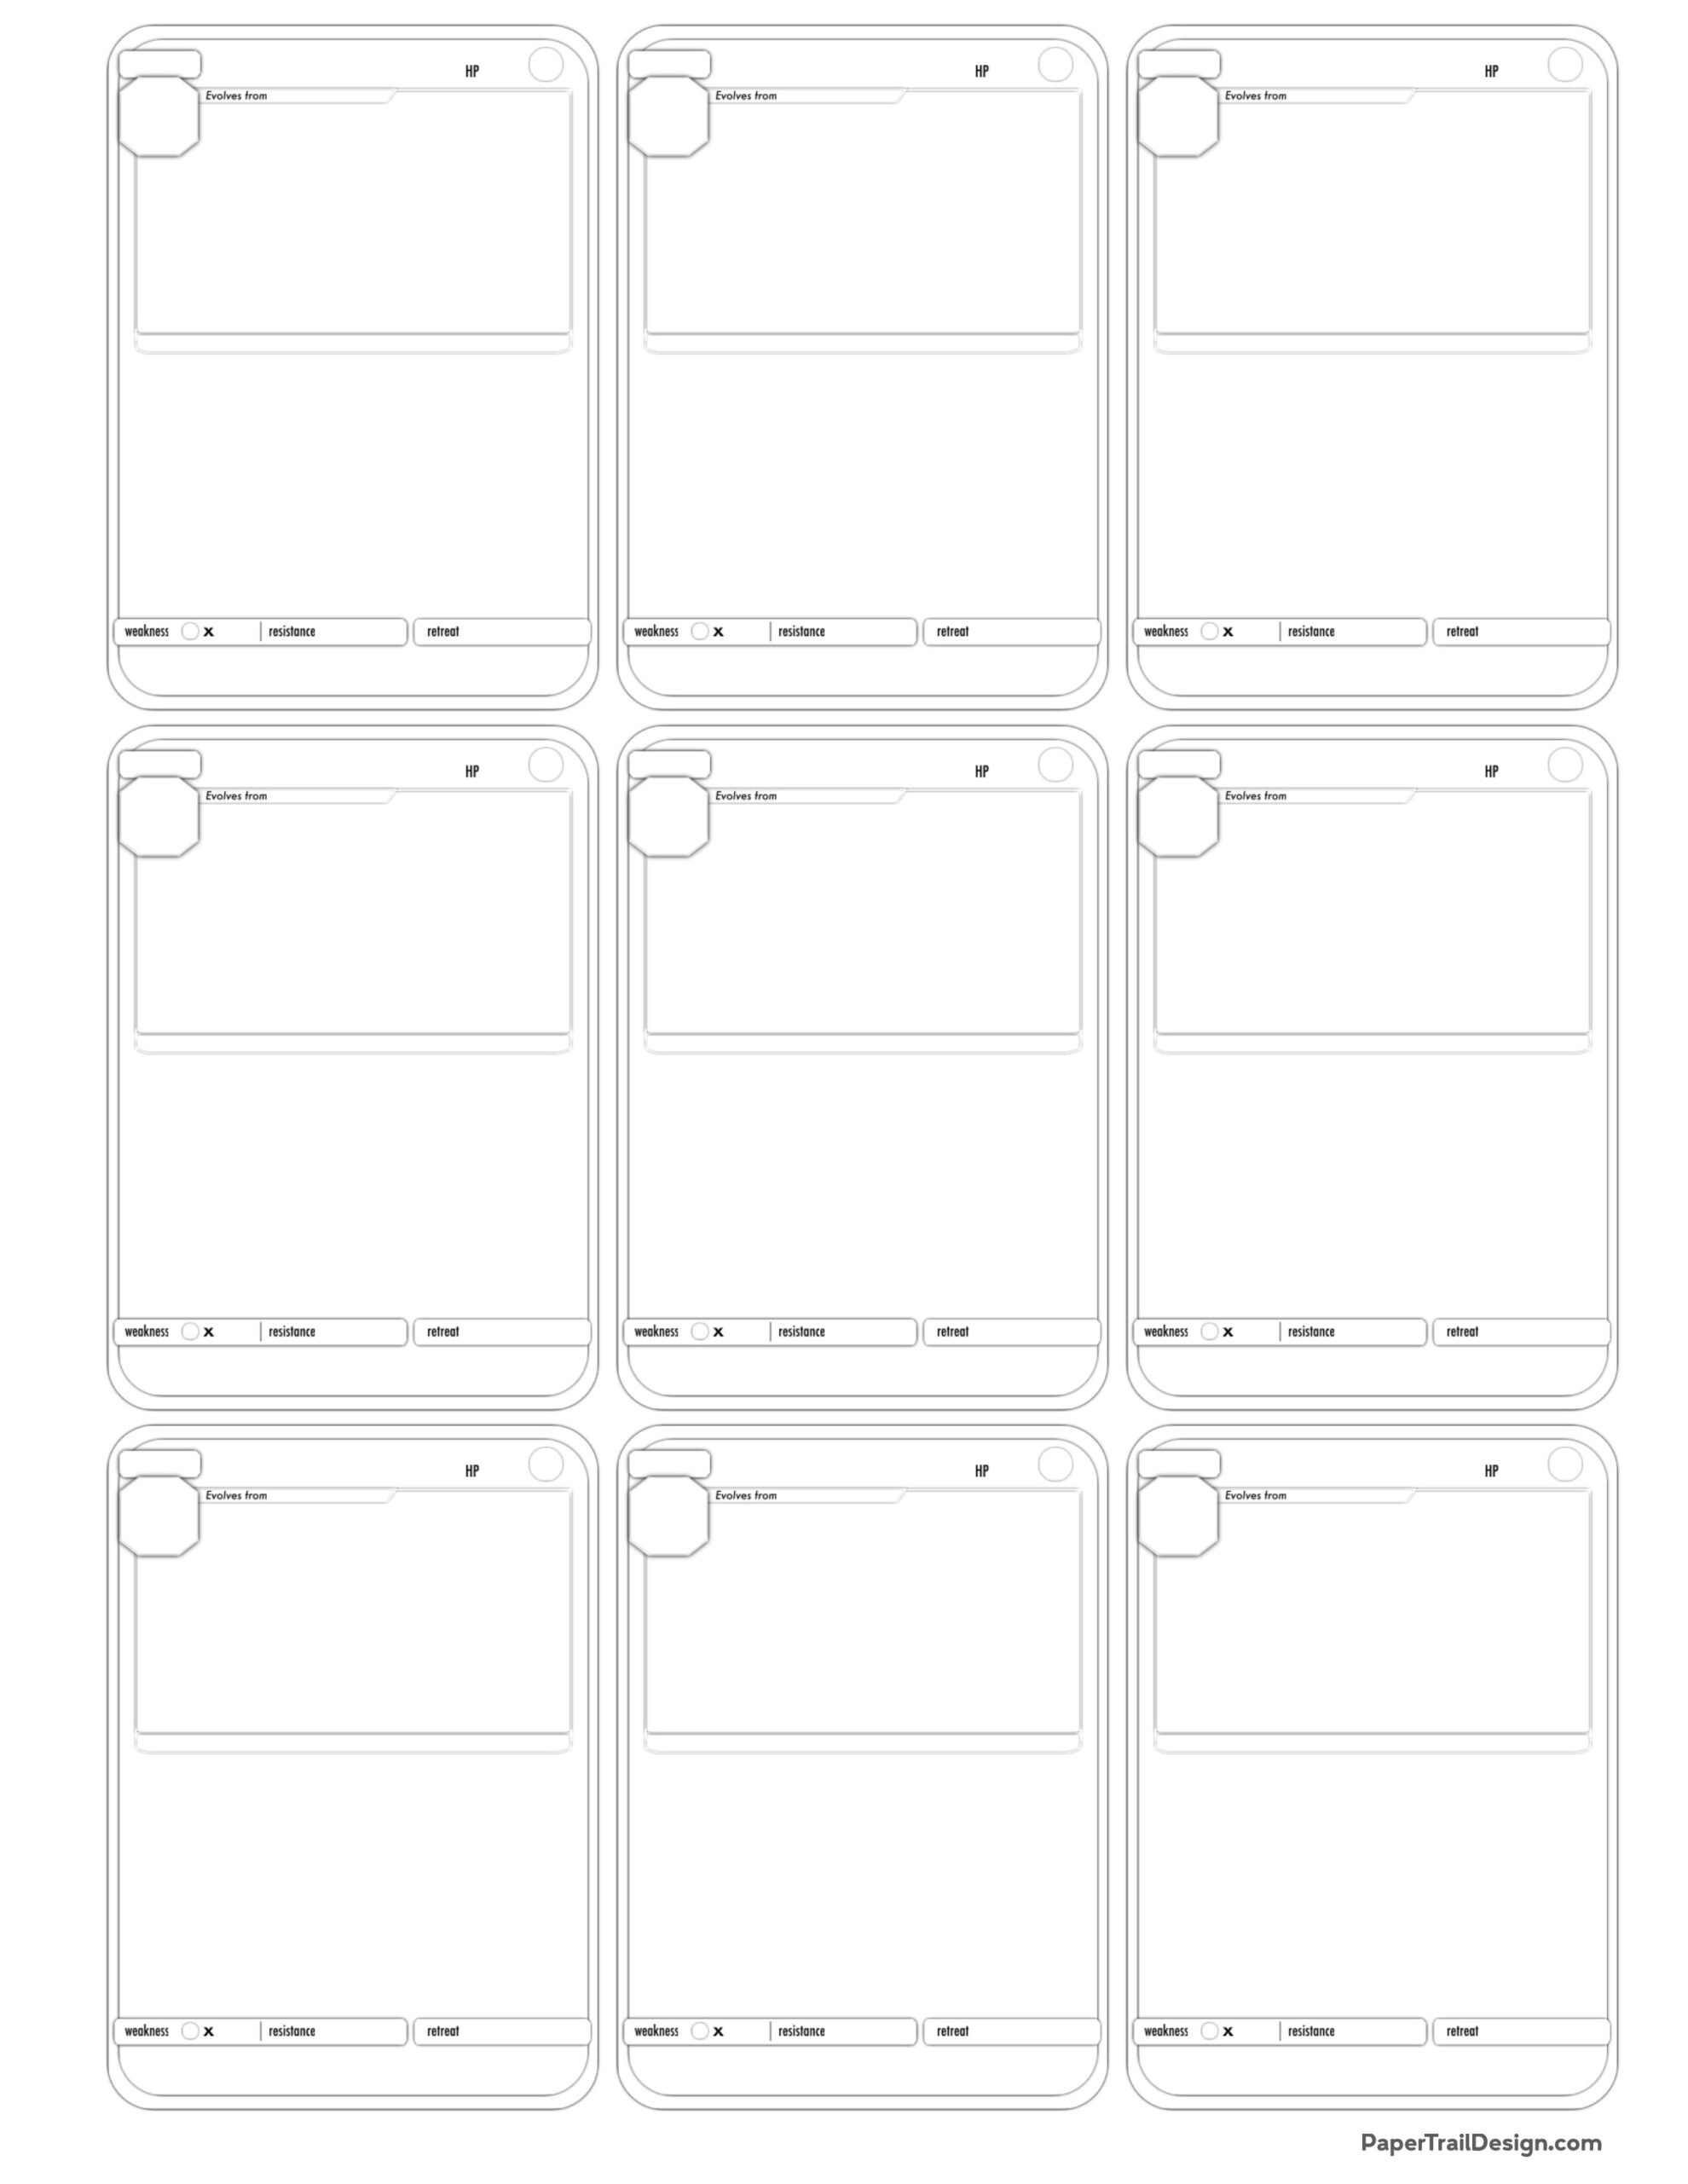 Pokémon Card Template Free Printable - Paper Trail Design With Regard To Pokemon Trainer Card Template